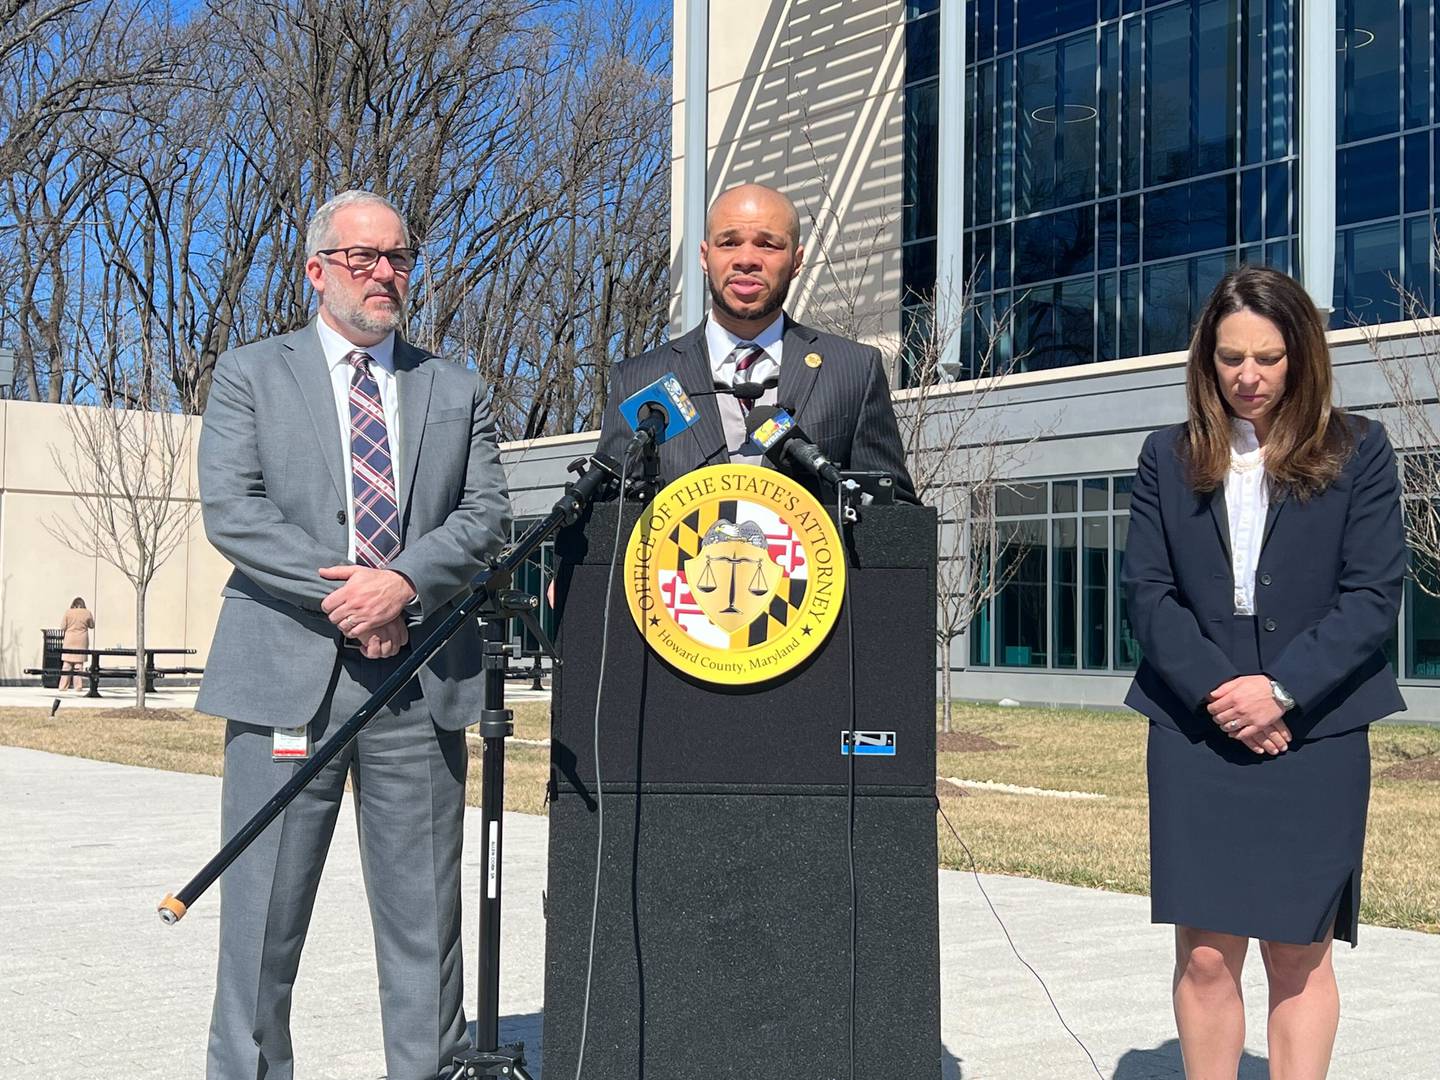 A man in a dark suit stand at a lectern in front of the Howard County courthouse. On his right is a man in a gray suit and on his left is a woman in navy suit.